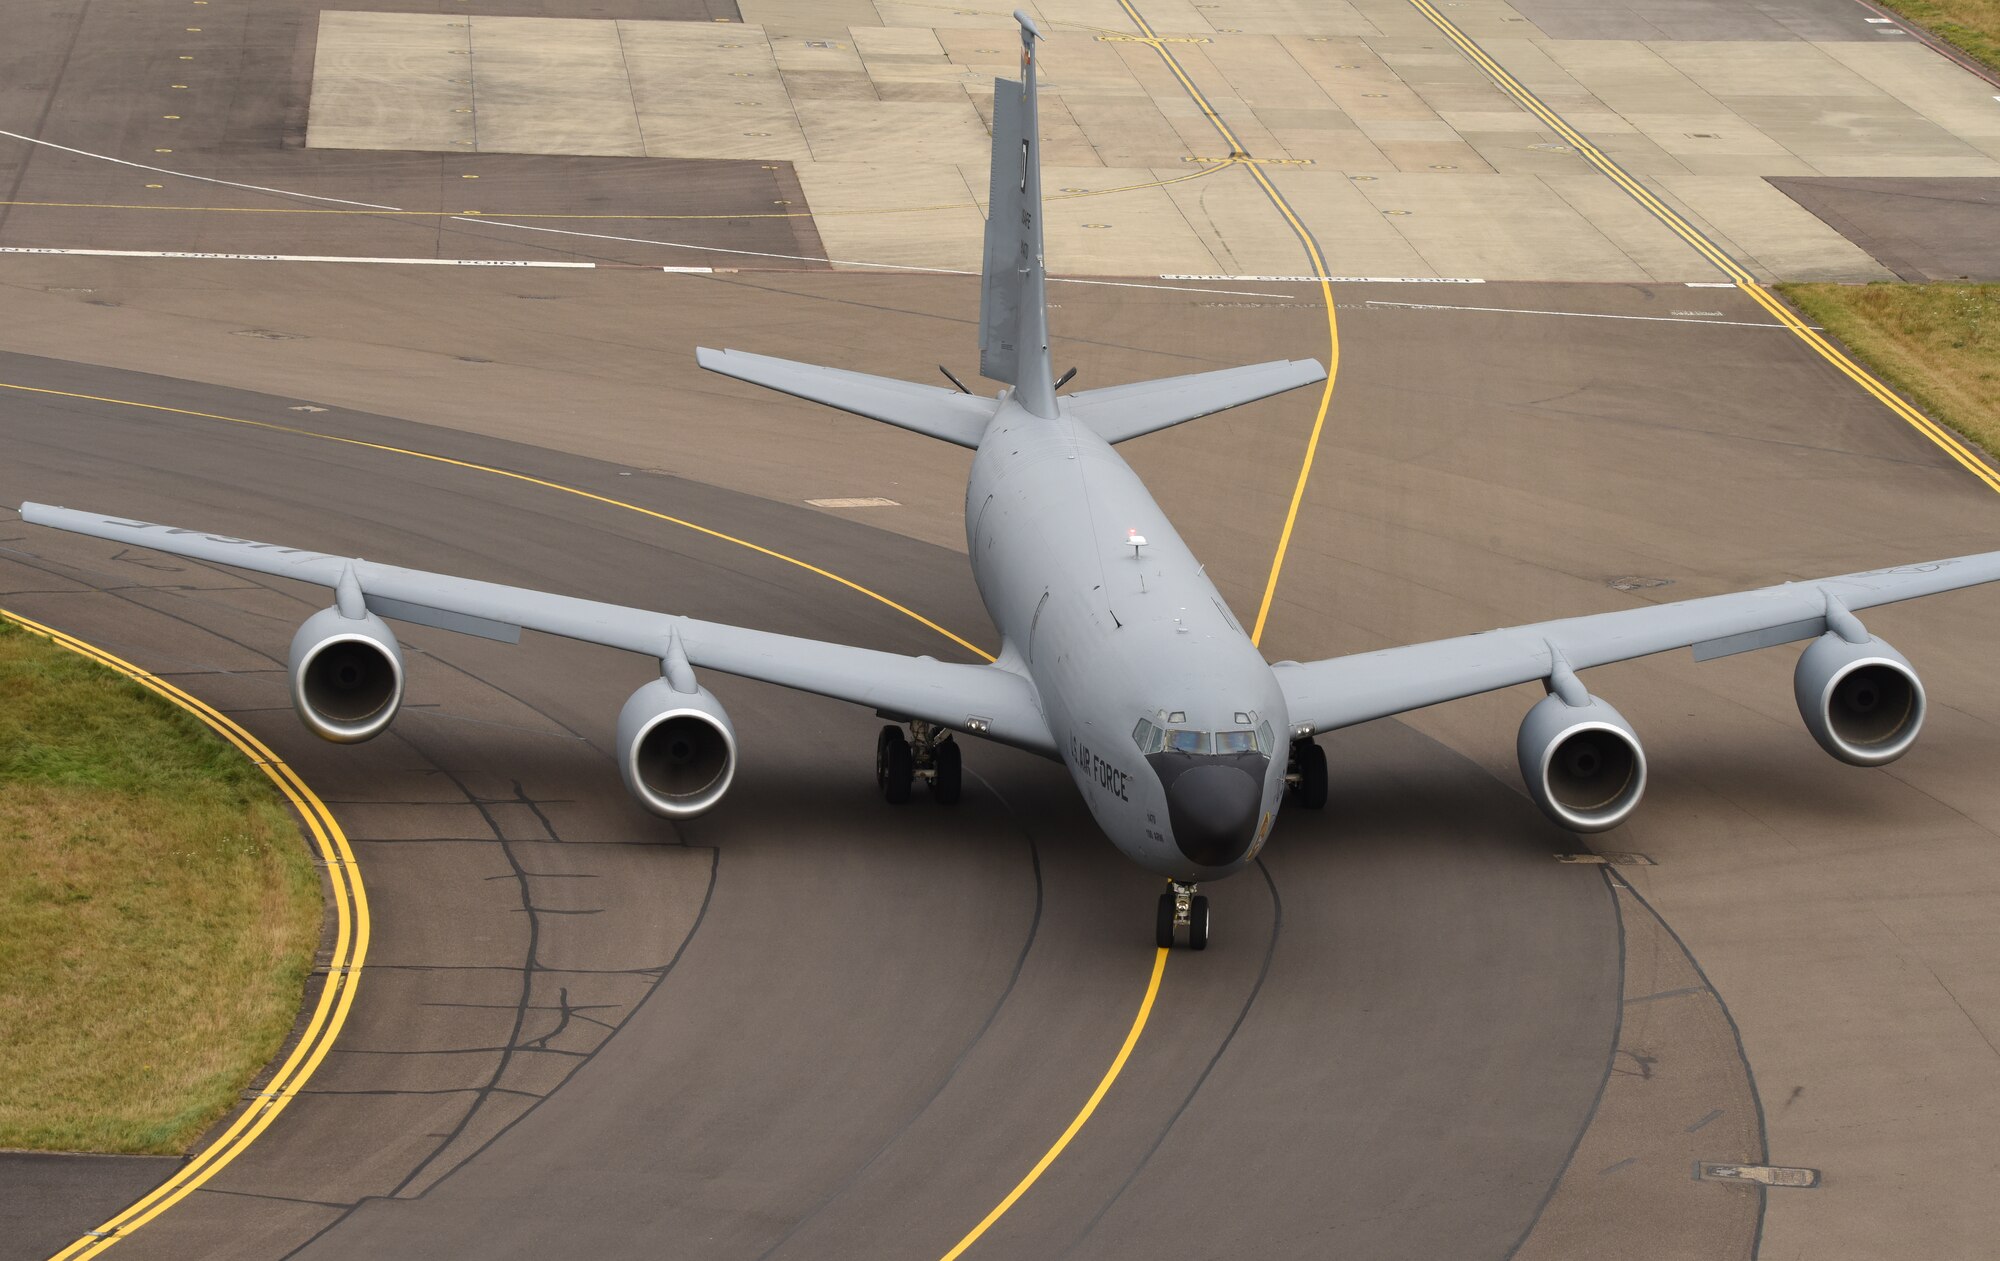 A U.S. Air Force KC-135 Stratotanker aircraft from the 100th Air Refueling Wing taxis past the air traffic control tower as part of an elephant walk during Exercise High Life at Royal Air Force Mildenhall, England, Sept. 13, 2021. The elephant walk signaled the exercise at Royal Air Force Fairford, and Team Mildenhall demonstrated elements of Agile Combat Employment to show they are ready any time, anywhere, and that agility, deterrence and resiliency are essential to defense and operational capability in a contested environment. (U.S. Air Force photo by Karen Abeyasekere)